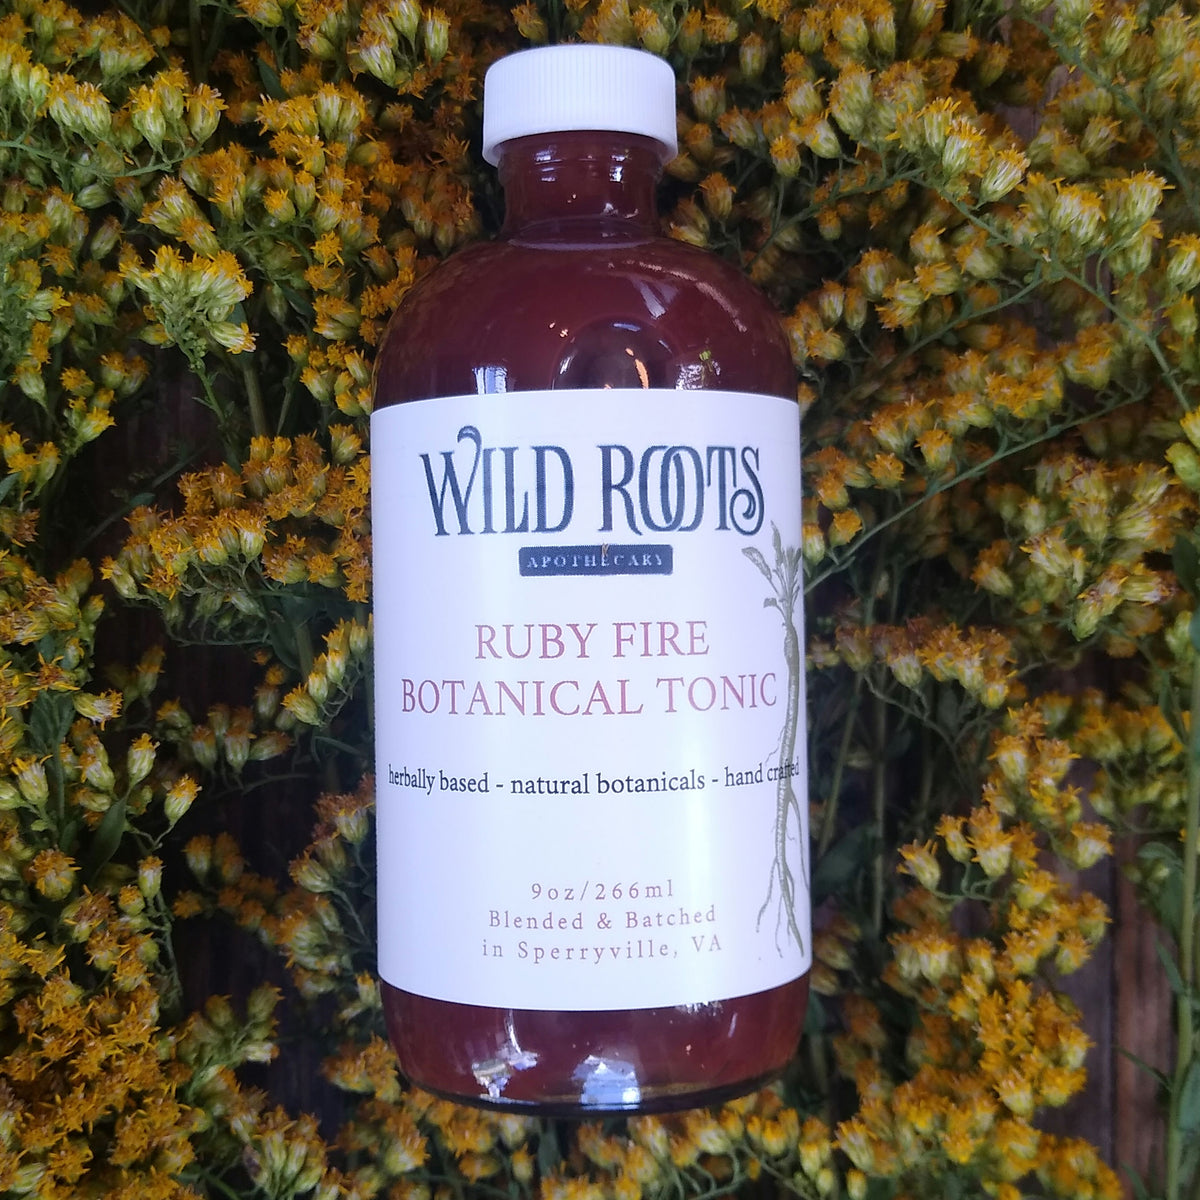 Ruby Fire Botanical Tonic—Wild Roots Apothecary